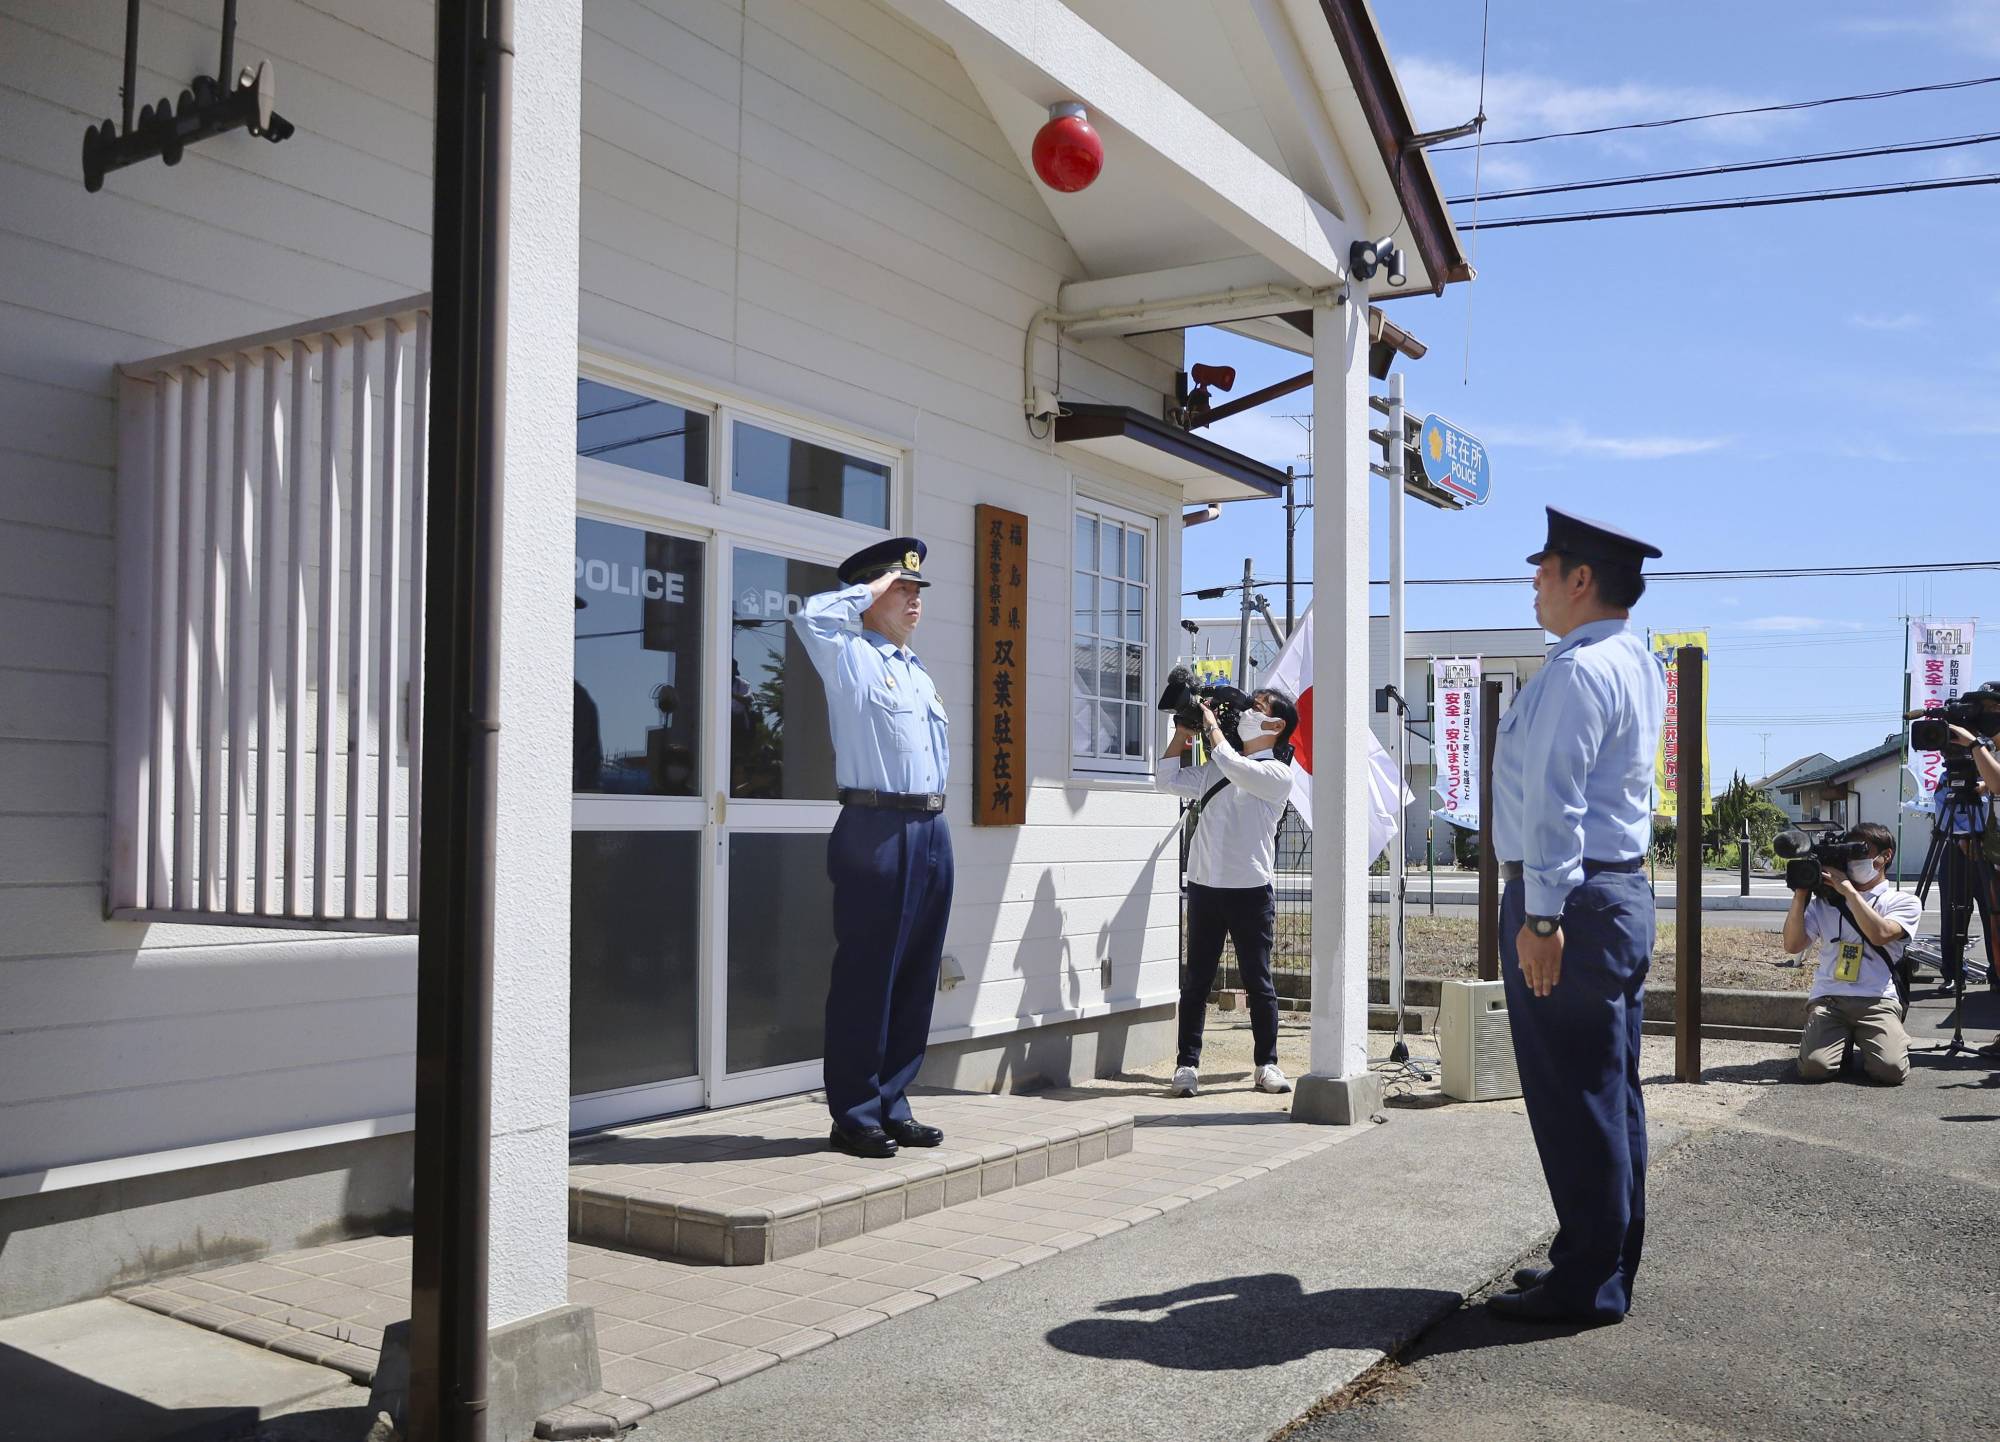 A ceremony is held Monday to open a police box in the town of Futaba, Fukushima Prefecture, which hosts the Fukushima No. 1 nuclear power plant. | KYODO